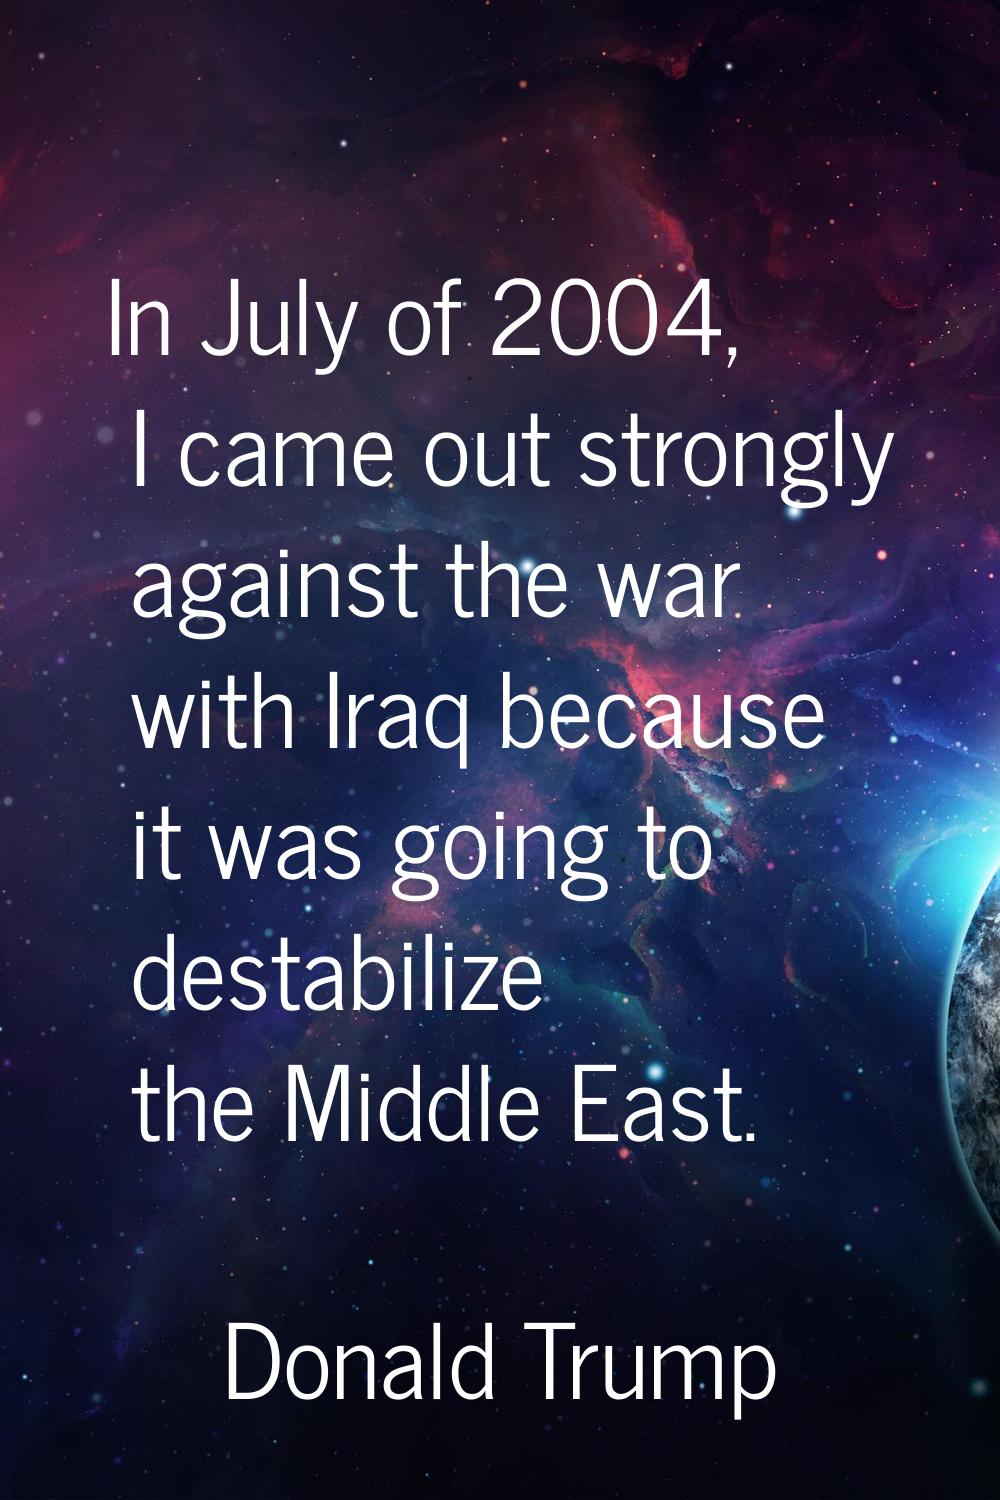 In July of 2004, I came out strongly against the war with Iraq because it was going to destabilize 